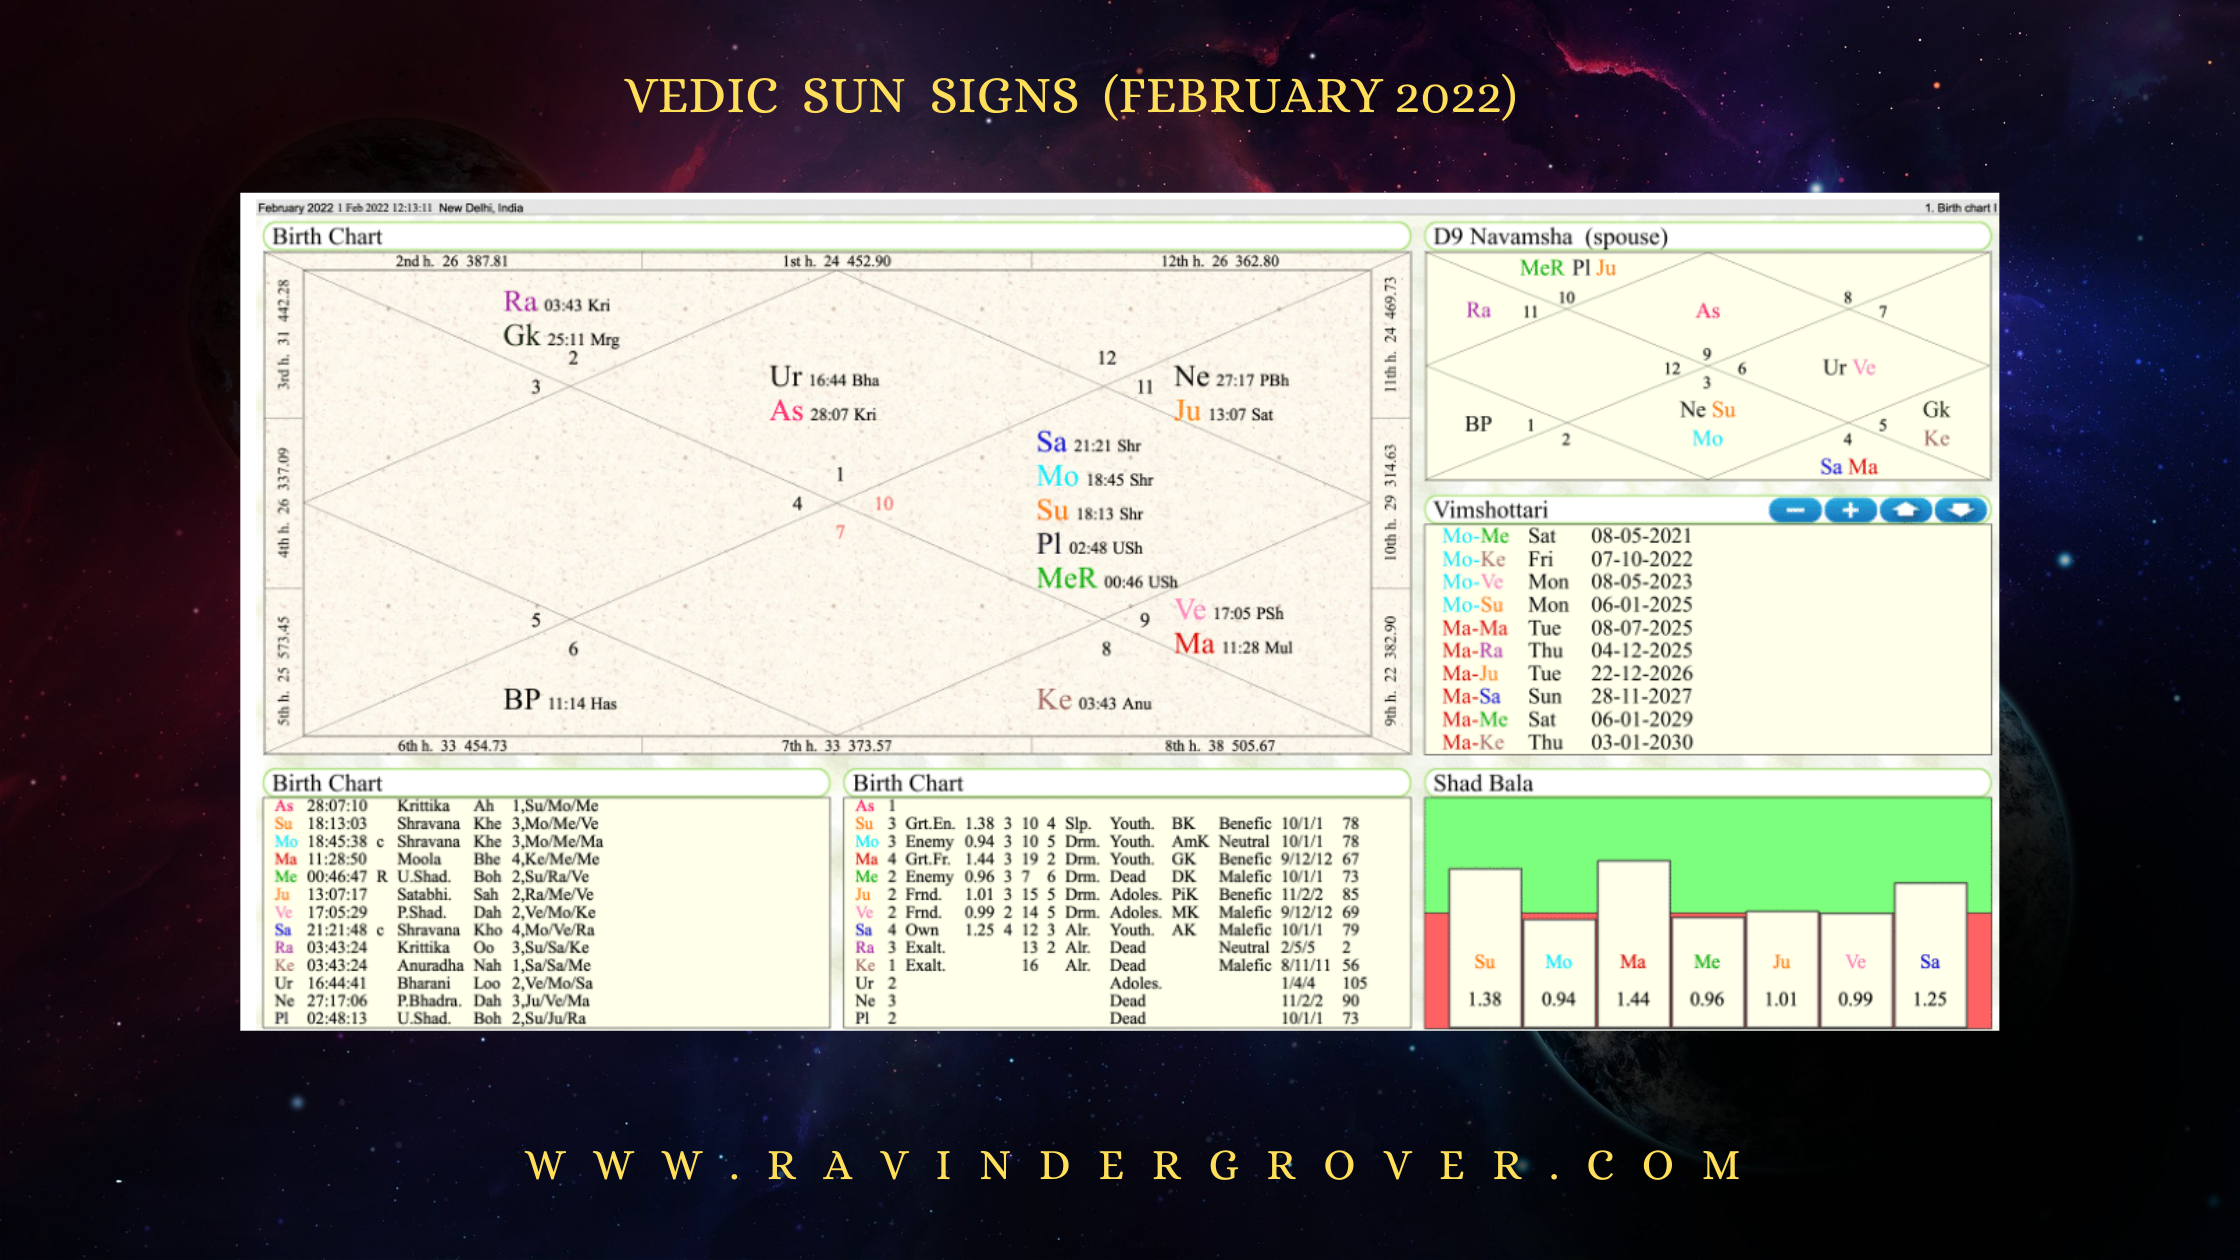 The Vedic Sun Signs (February 2022)